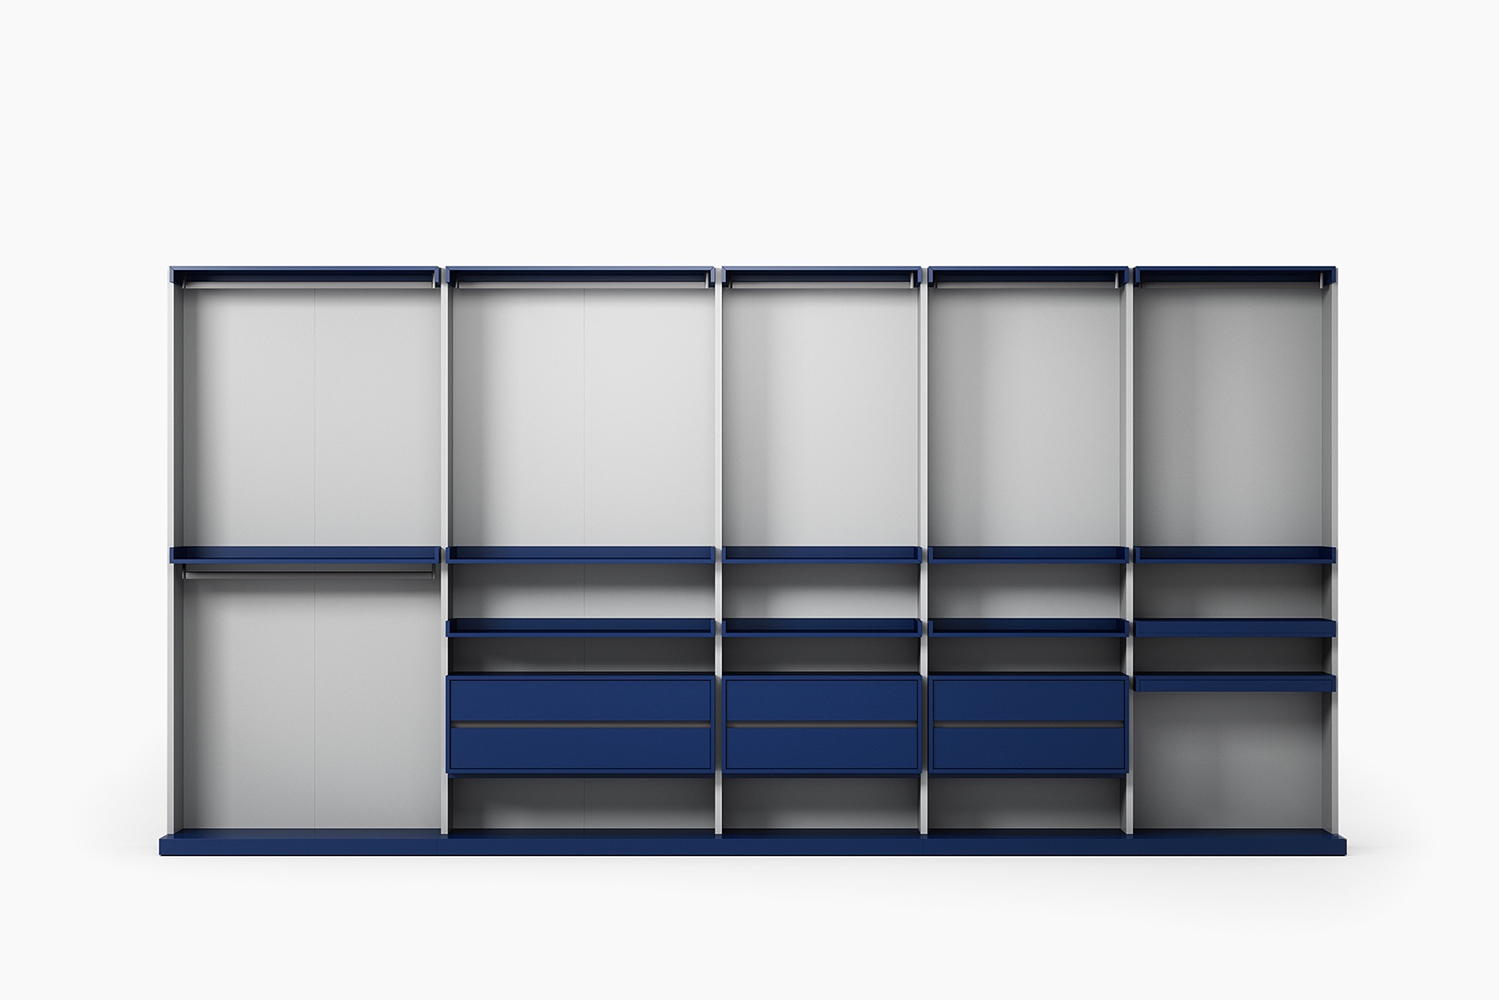 Designer modular walk-in wardrobes system elements, fitted to your home by Krieder.